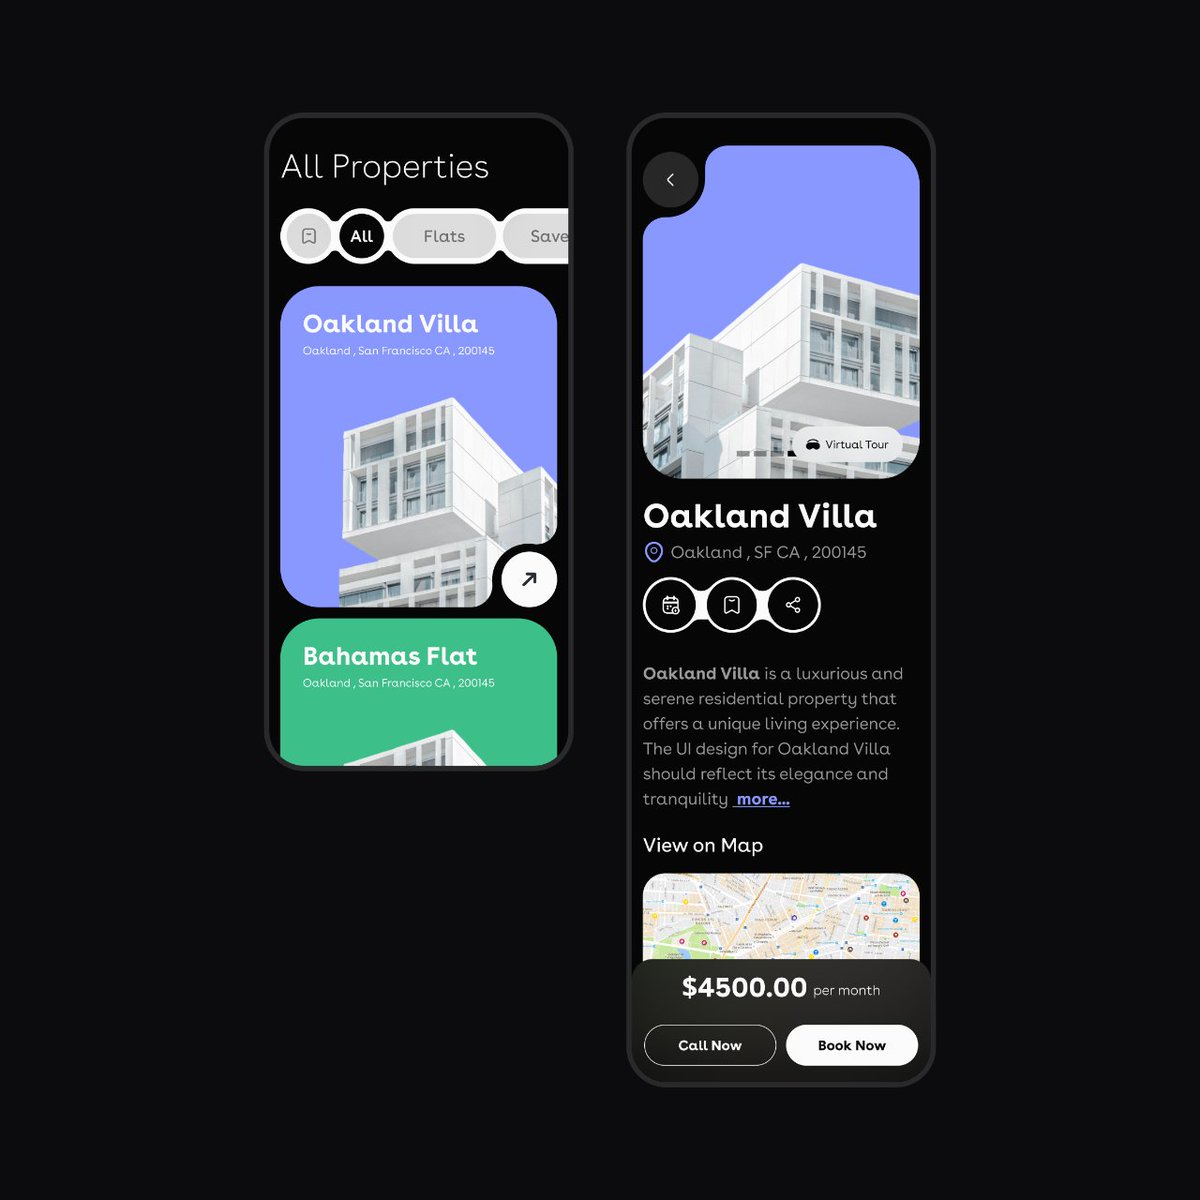 Foldable Real Estate: Explore Your Dream Home! Part 3 - Discover properties in style on foldable screens.
dribbble.com/domingo
#FoldableLiving #RealEstateTech #InnovativeDesign #FoldableScreens #DreamHome #PropertySearch #UIInspiration #FutureHomes #FoldableUI